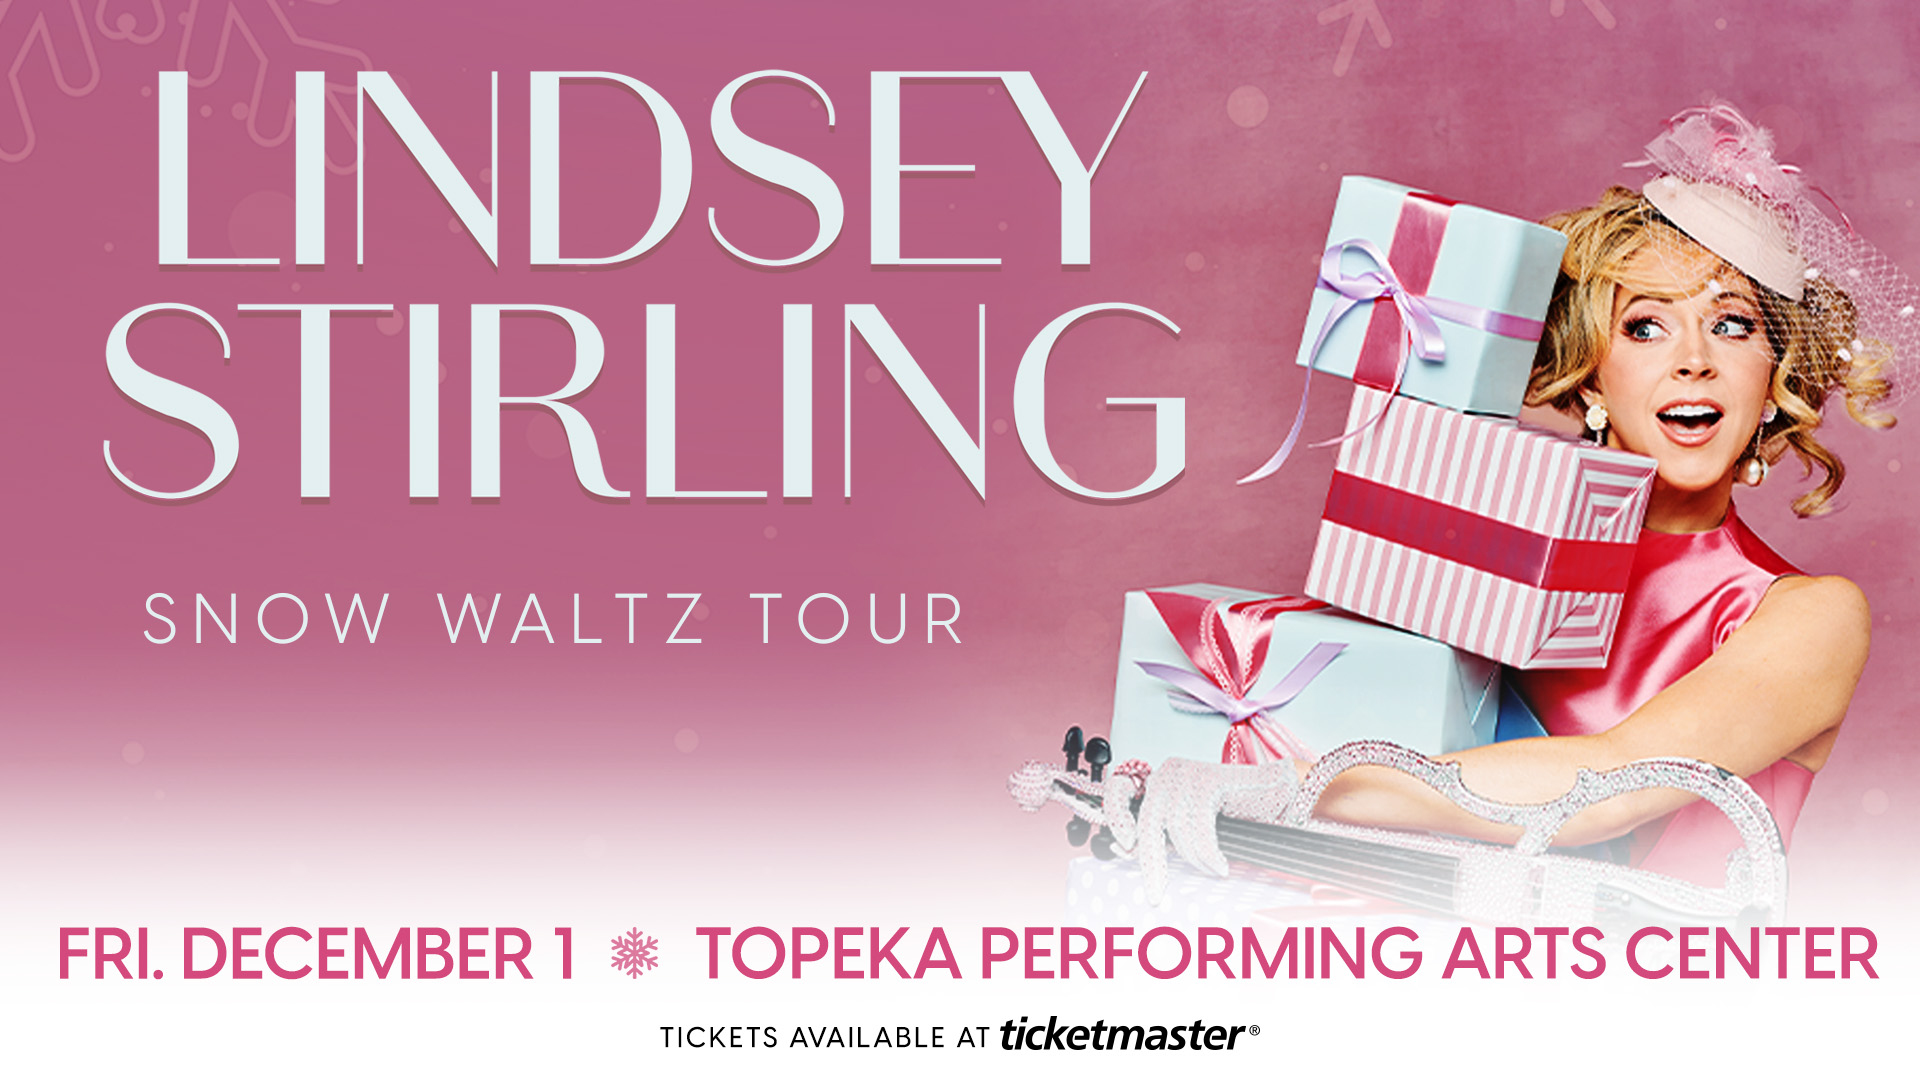 Don’t Miss Lindsey Stirling’s Snow Waltz Tour at TPAC